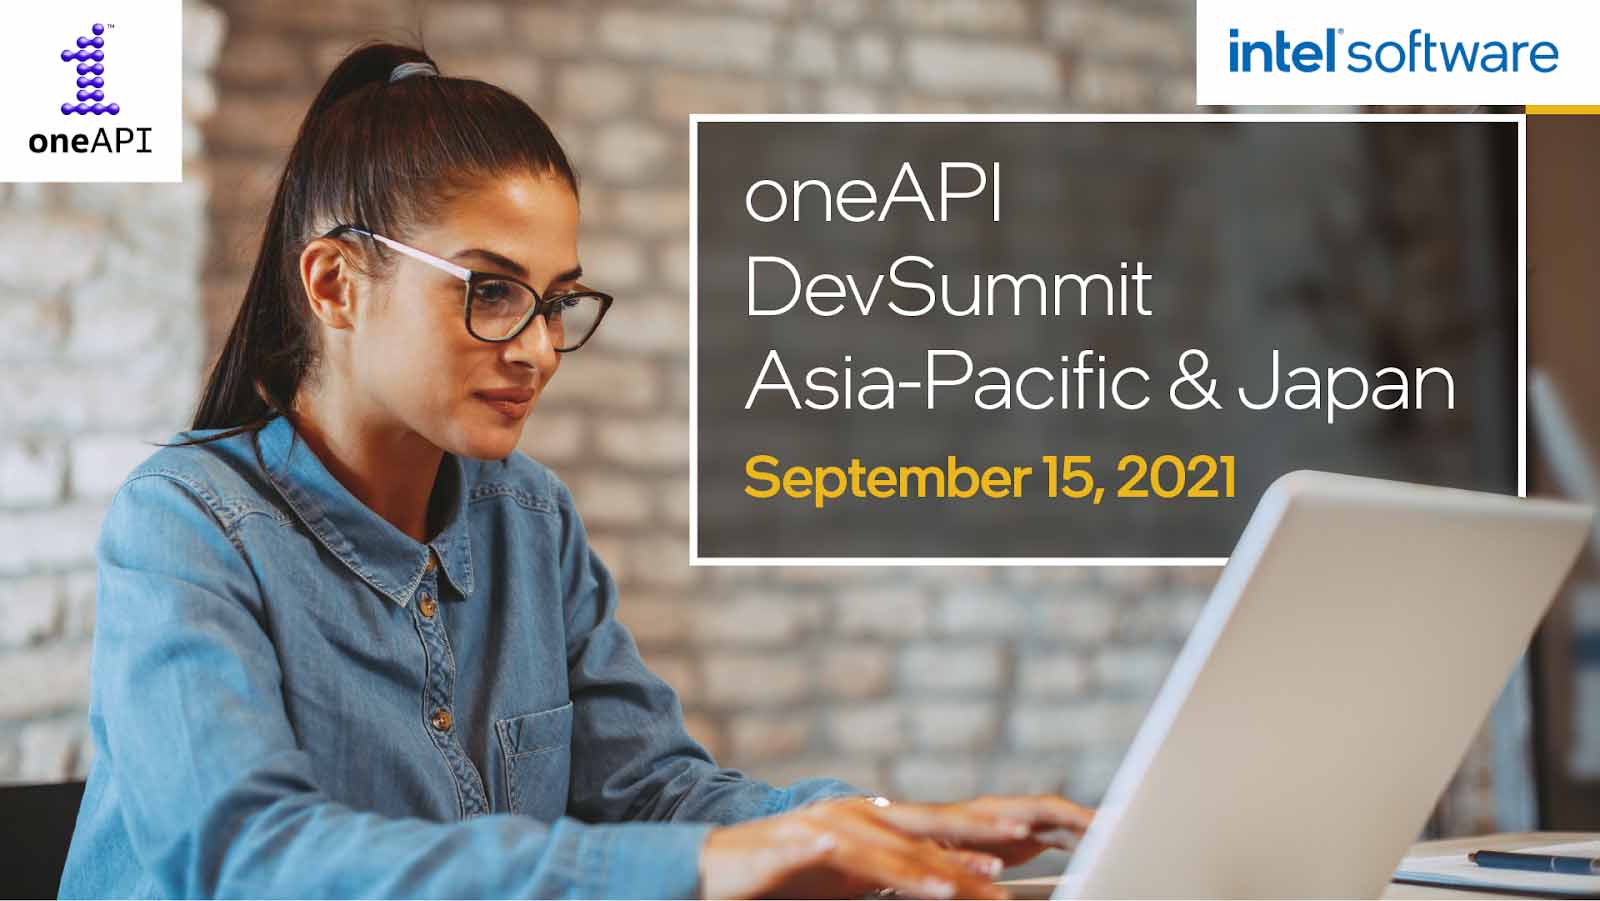 Intel® Announces oneAPI DevSummit, Asia-Pacific & Japan — An Exclusive Event For HPC & AI Developers